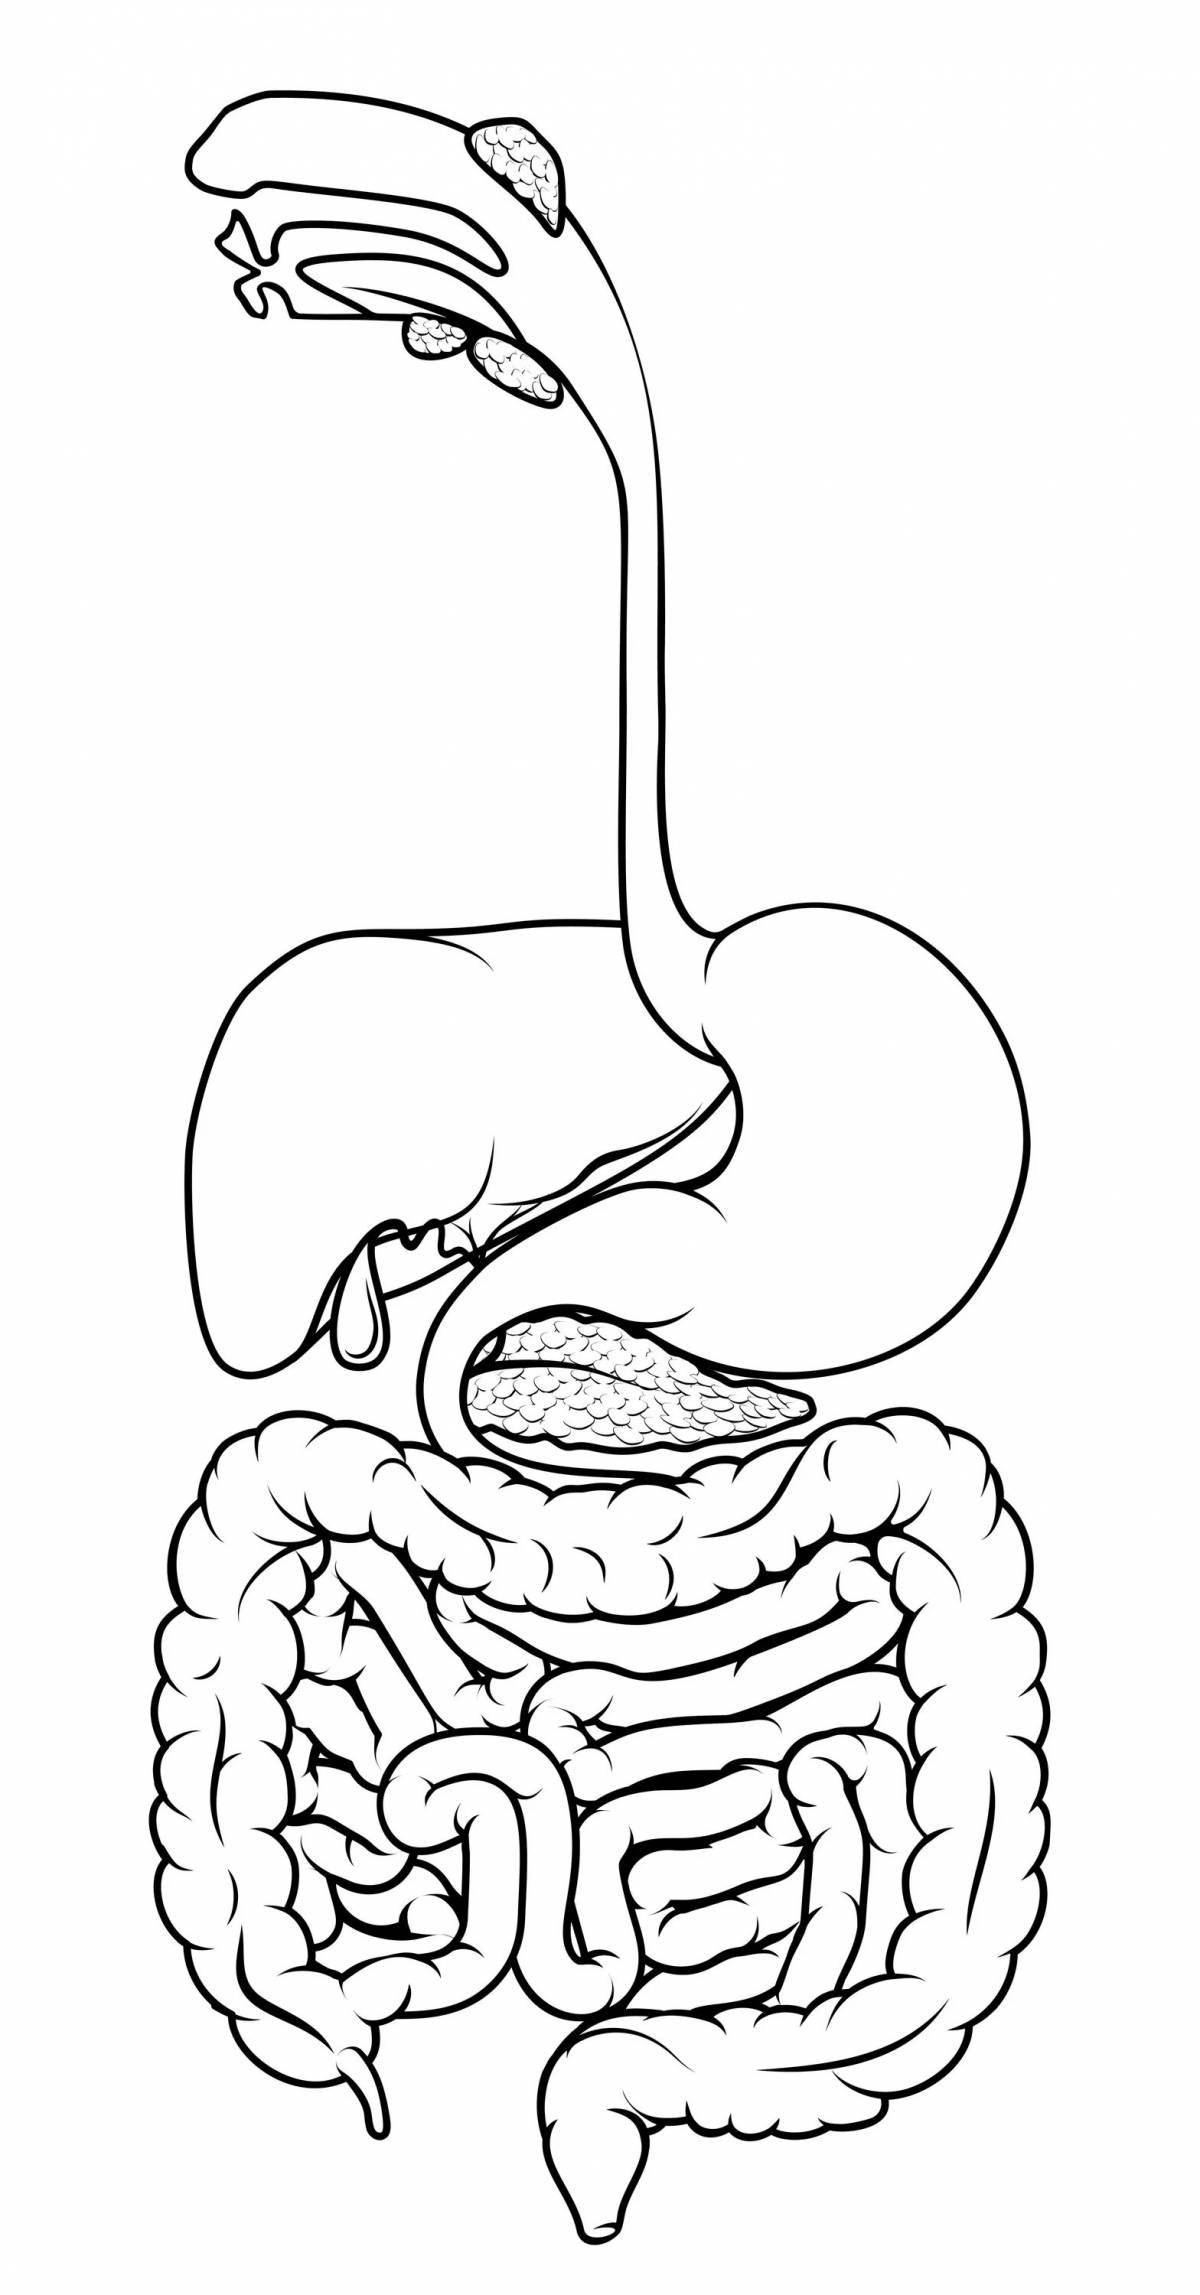 Coloring page wonderful digestive system